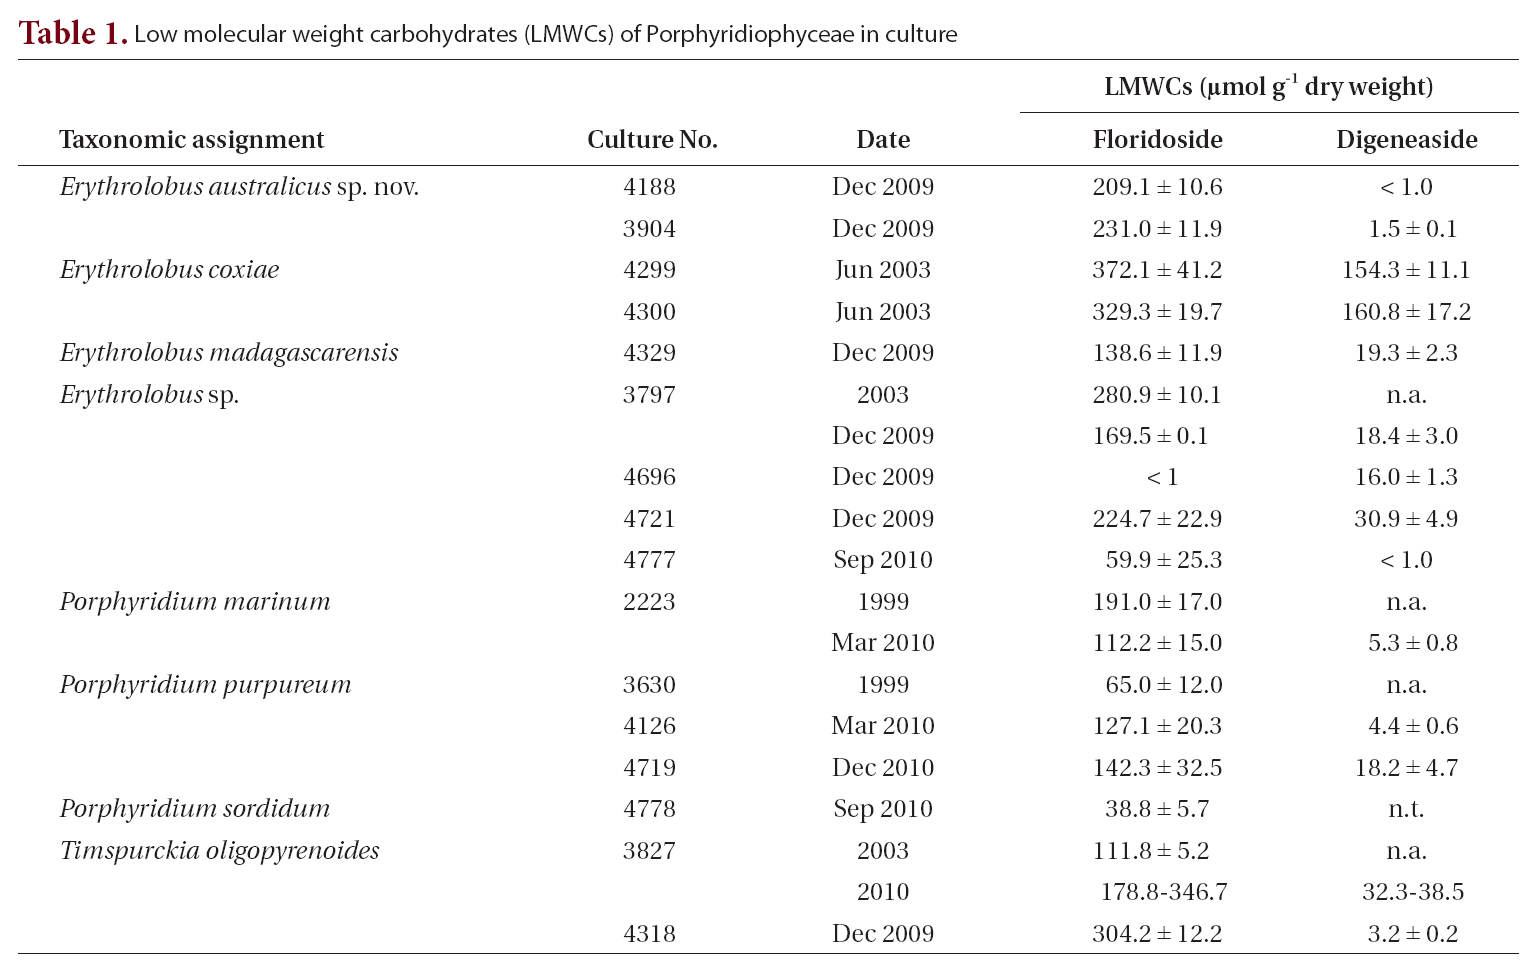 Low molecular weight carbohydrates (LMWCs) of Porphyridiophyceae in culture